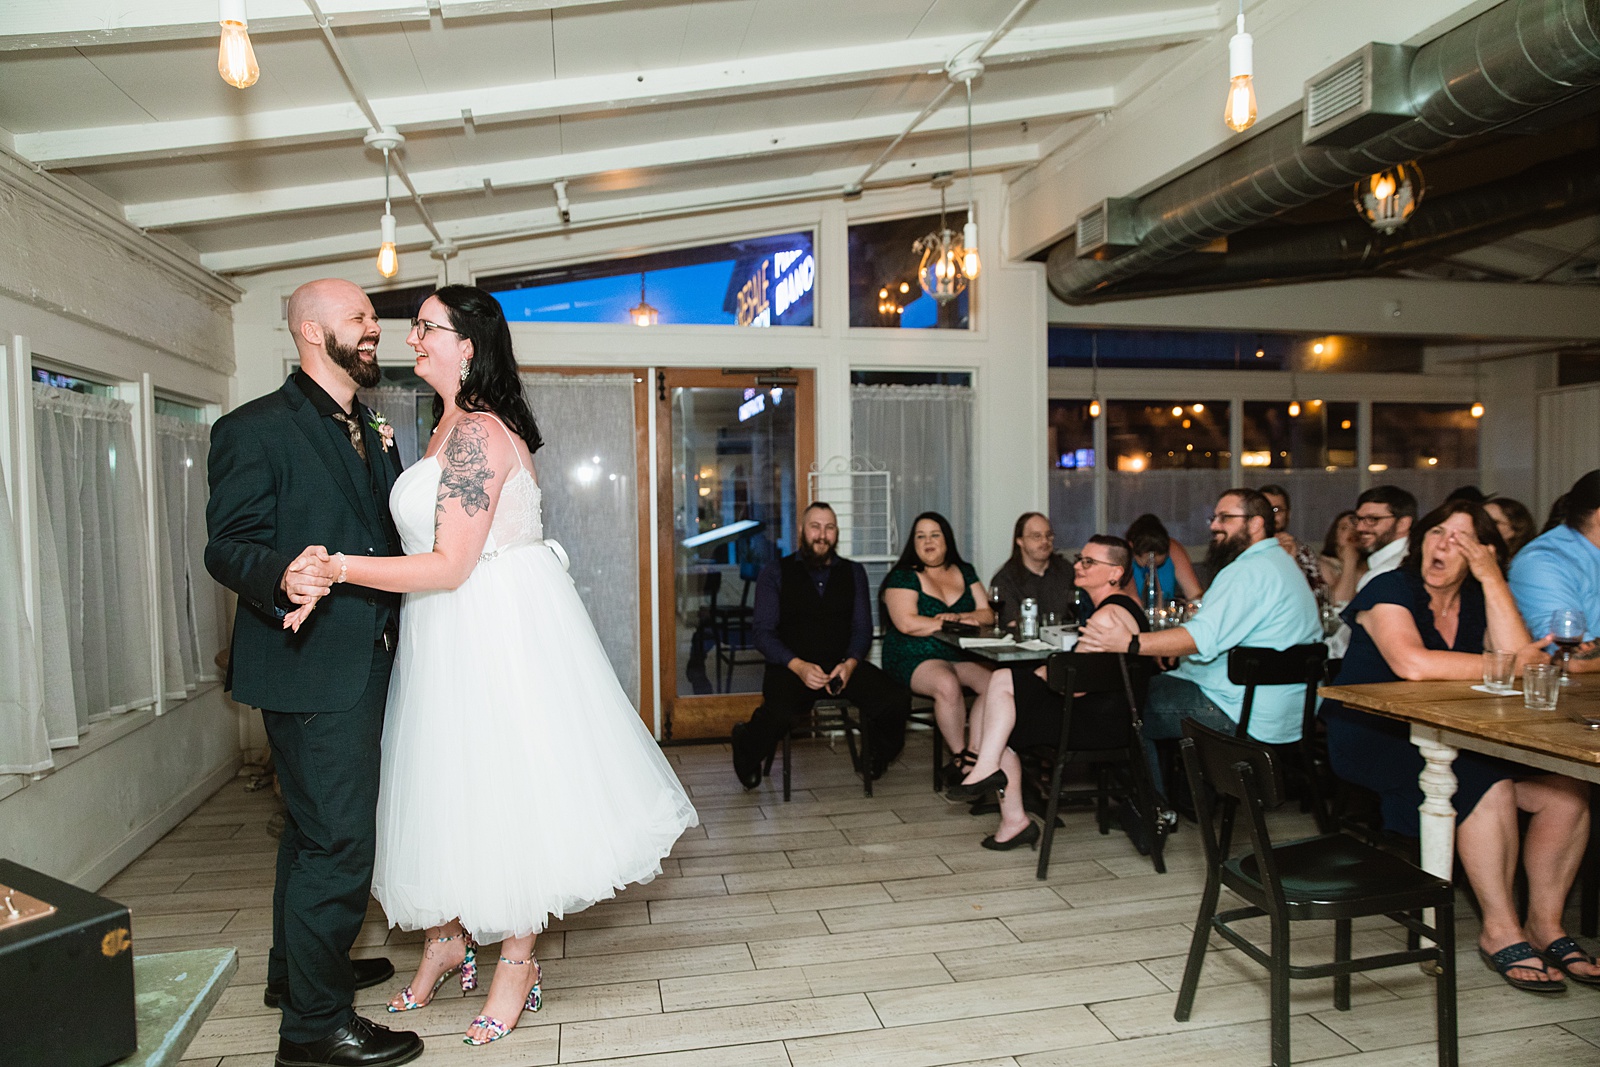 Bride & Groom dancing together during their Mogollon Rim intimate wedding by Payson elopement photographer PMA Photography.